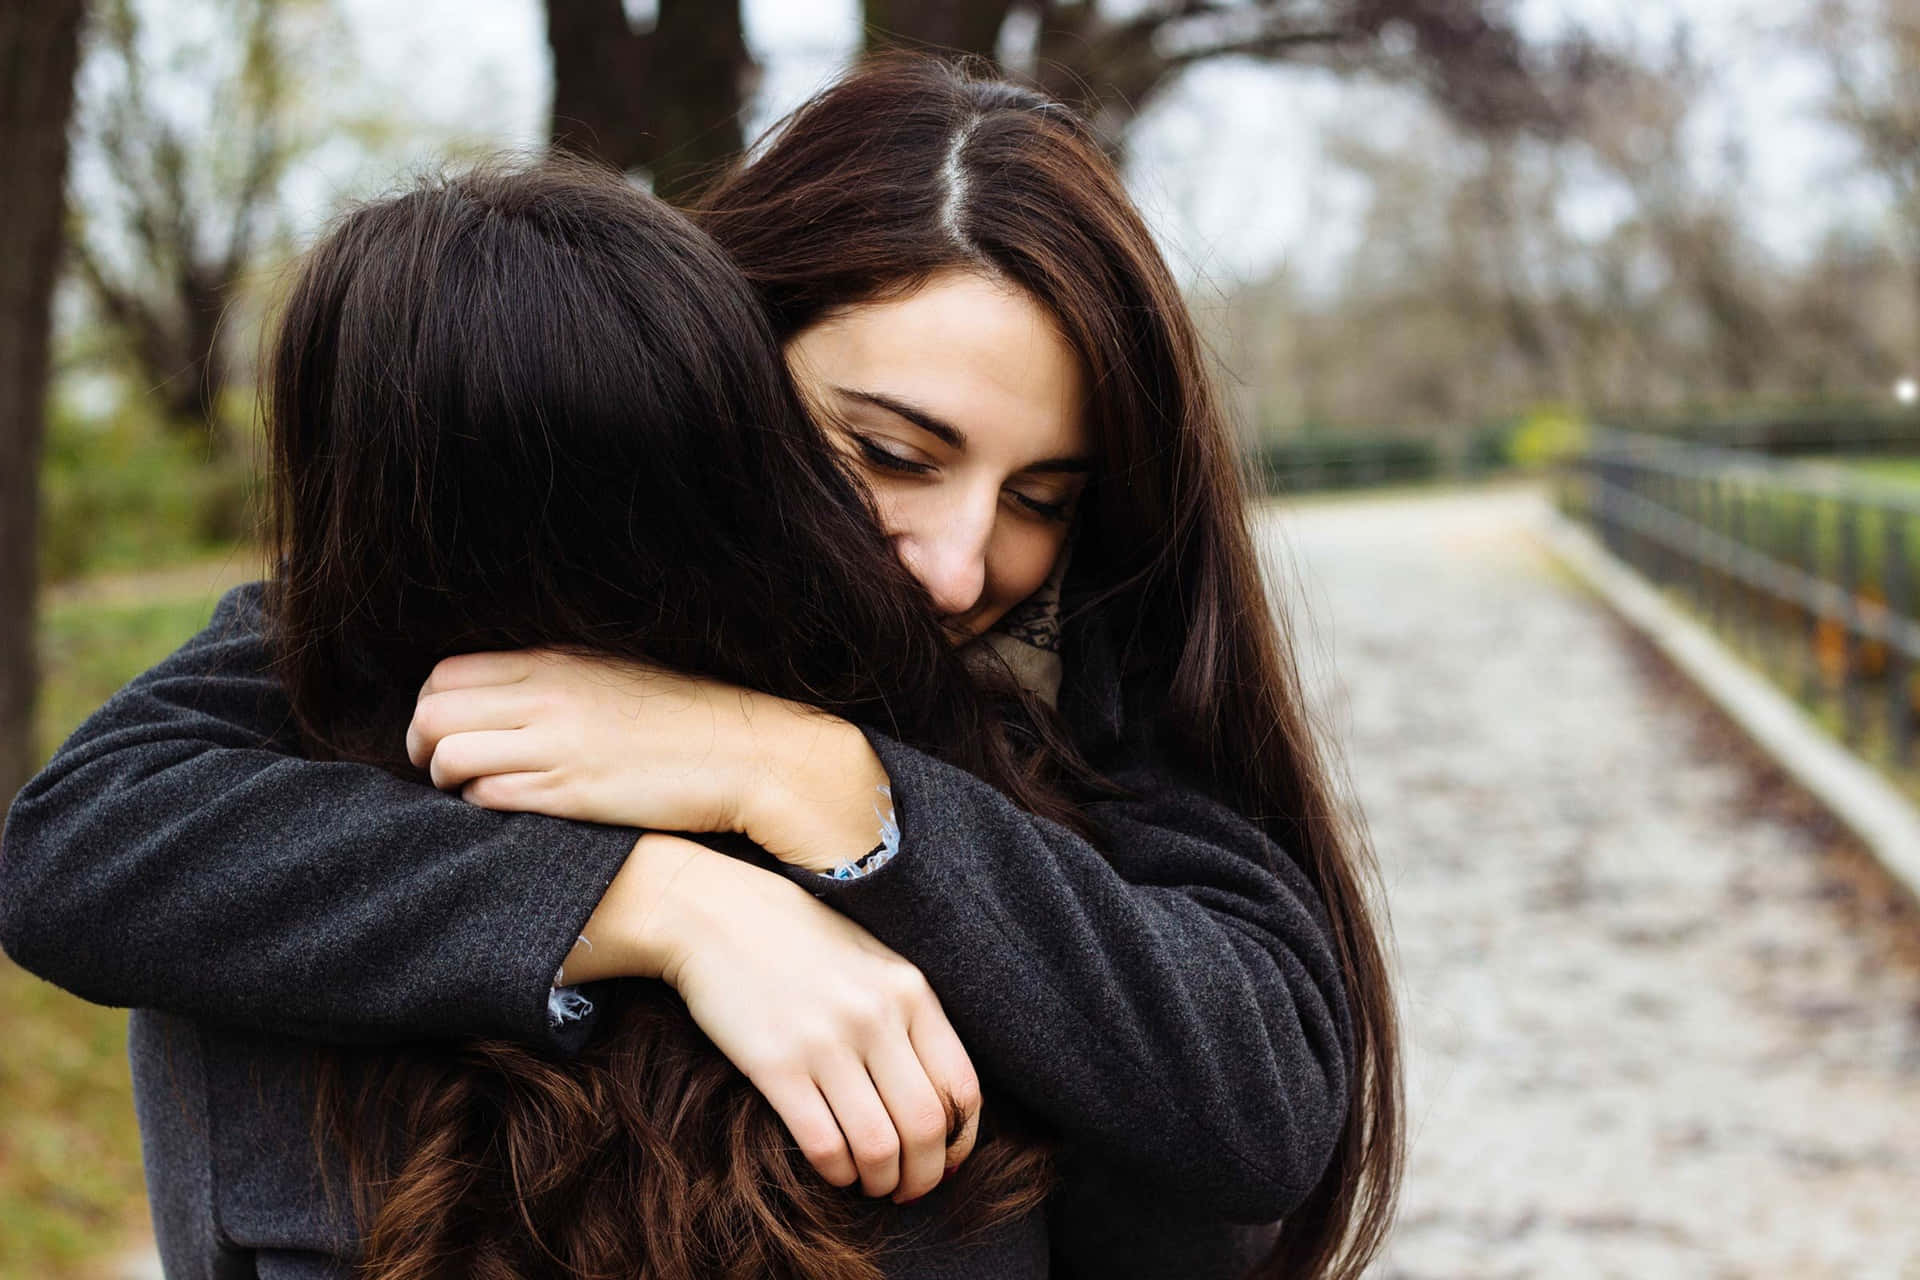 Learning To Forgive Is One Of The Most Powerful Things We Can Do